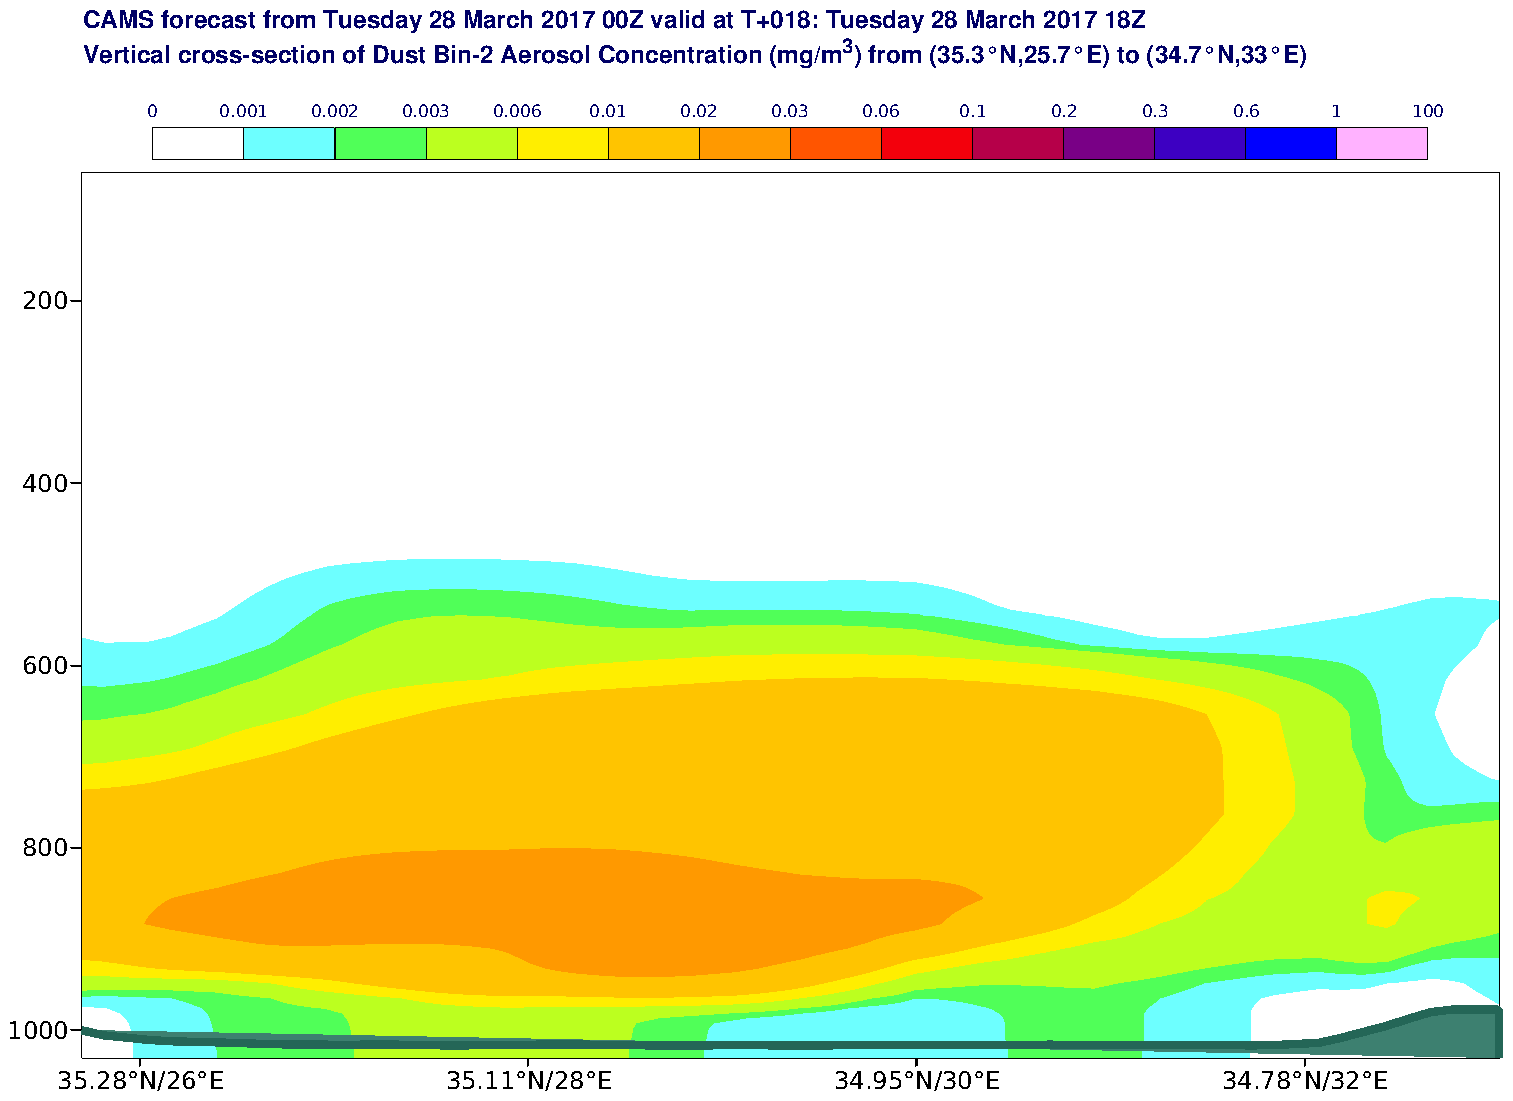 Vertical cross-section of Dust Bin-2 Aerosol Concentration (mg/m3) valid at T18 - 2017-03-28 18:00